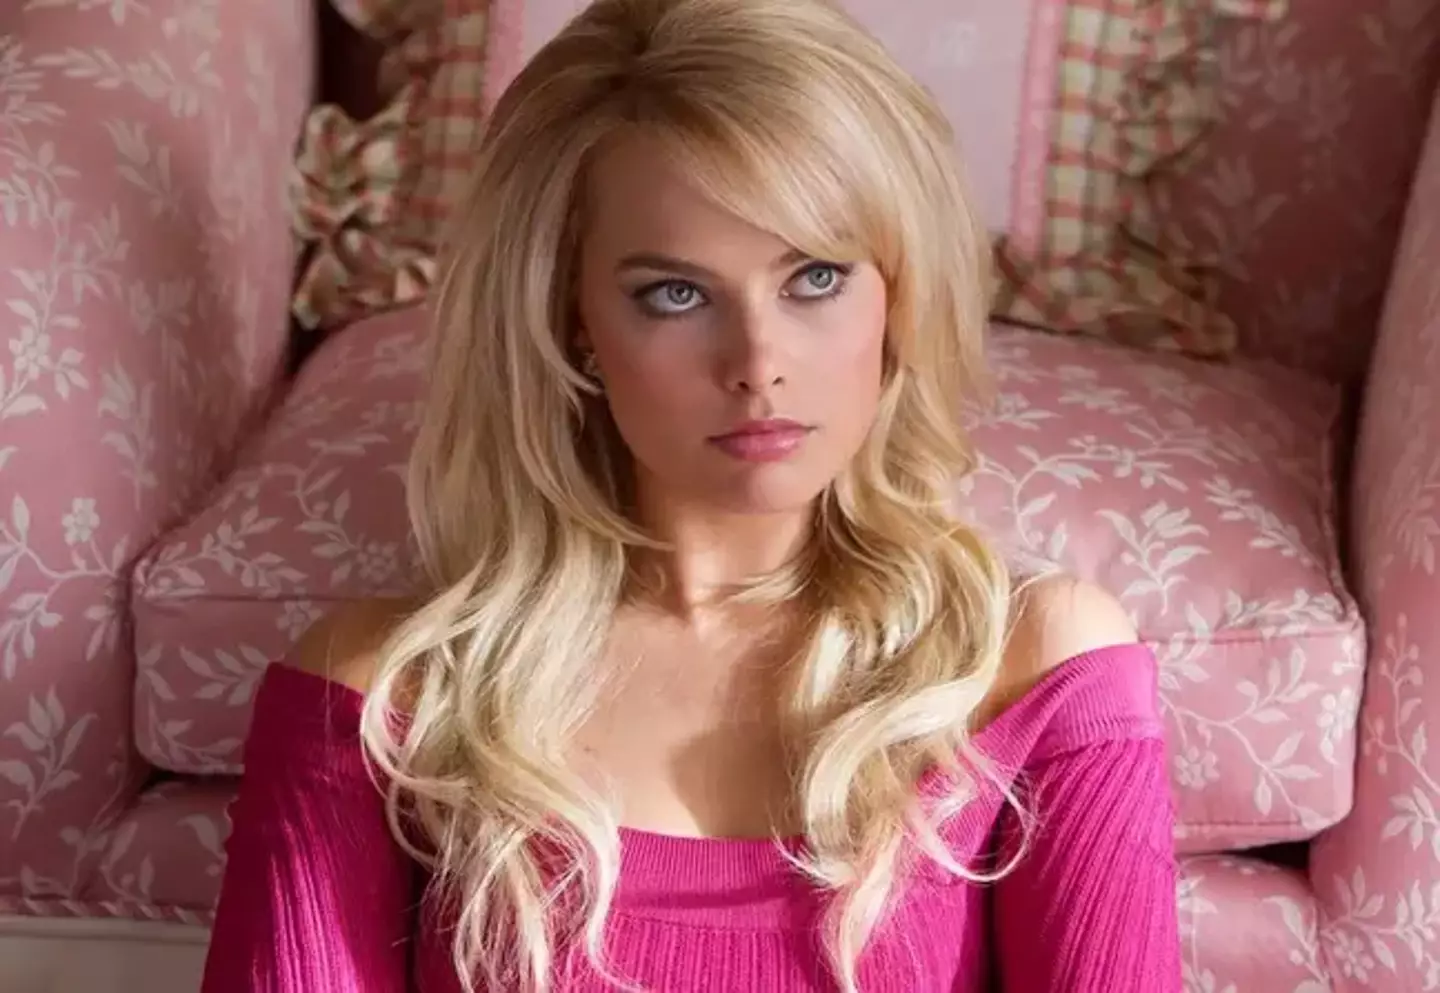 Margot Robbie's character was based on Nadine Macaluso.